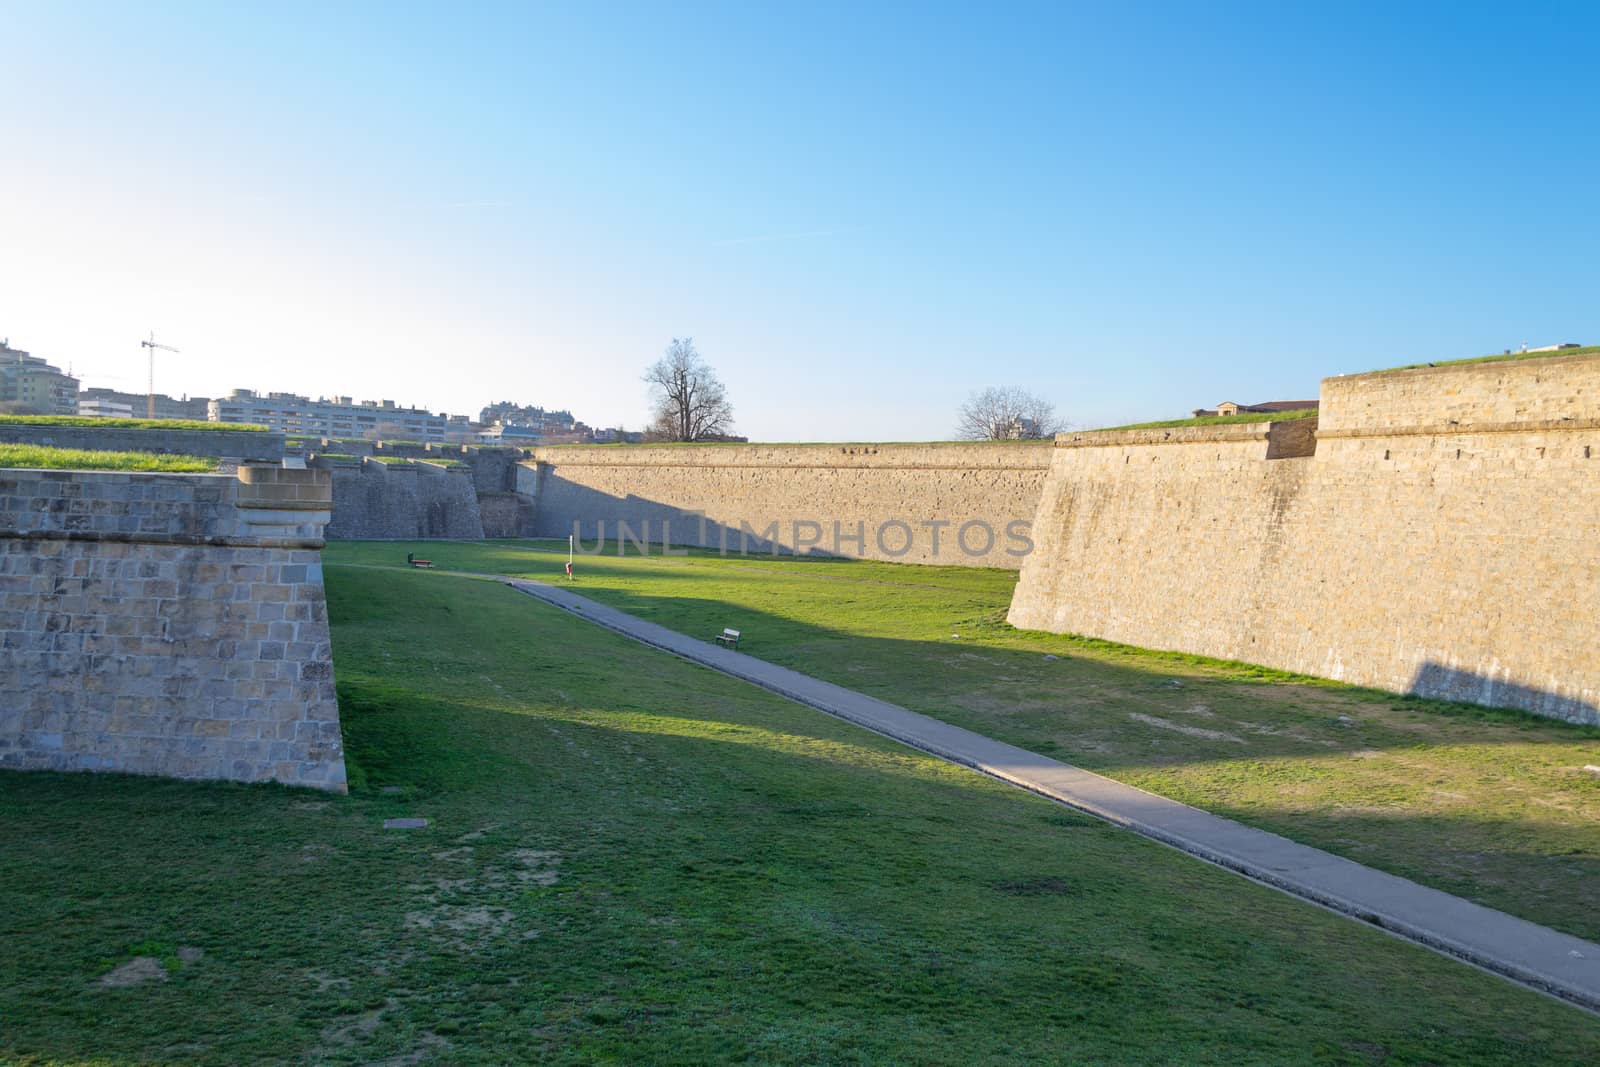 Citadel of Pamplona constructed between XV and XVI centuries  as a defensive structure